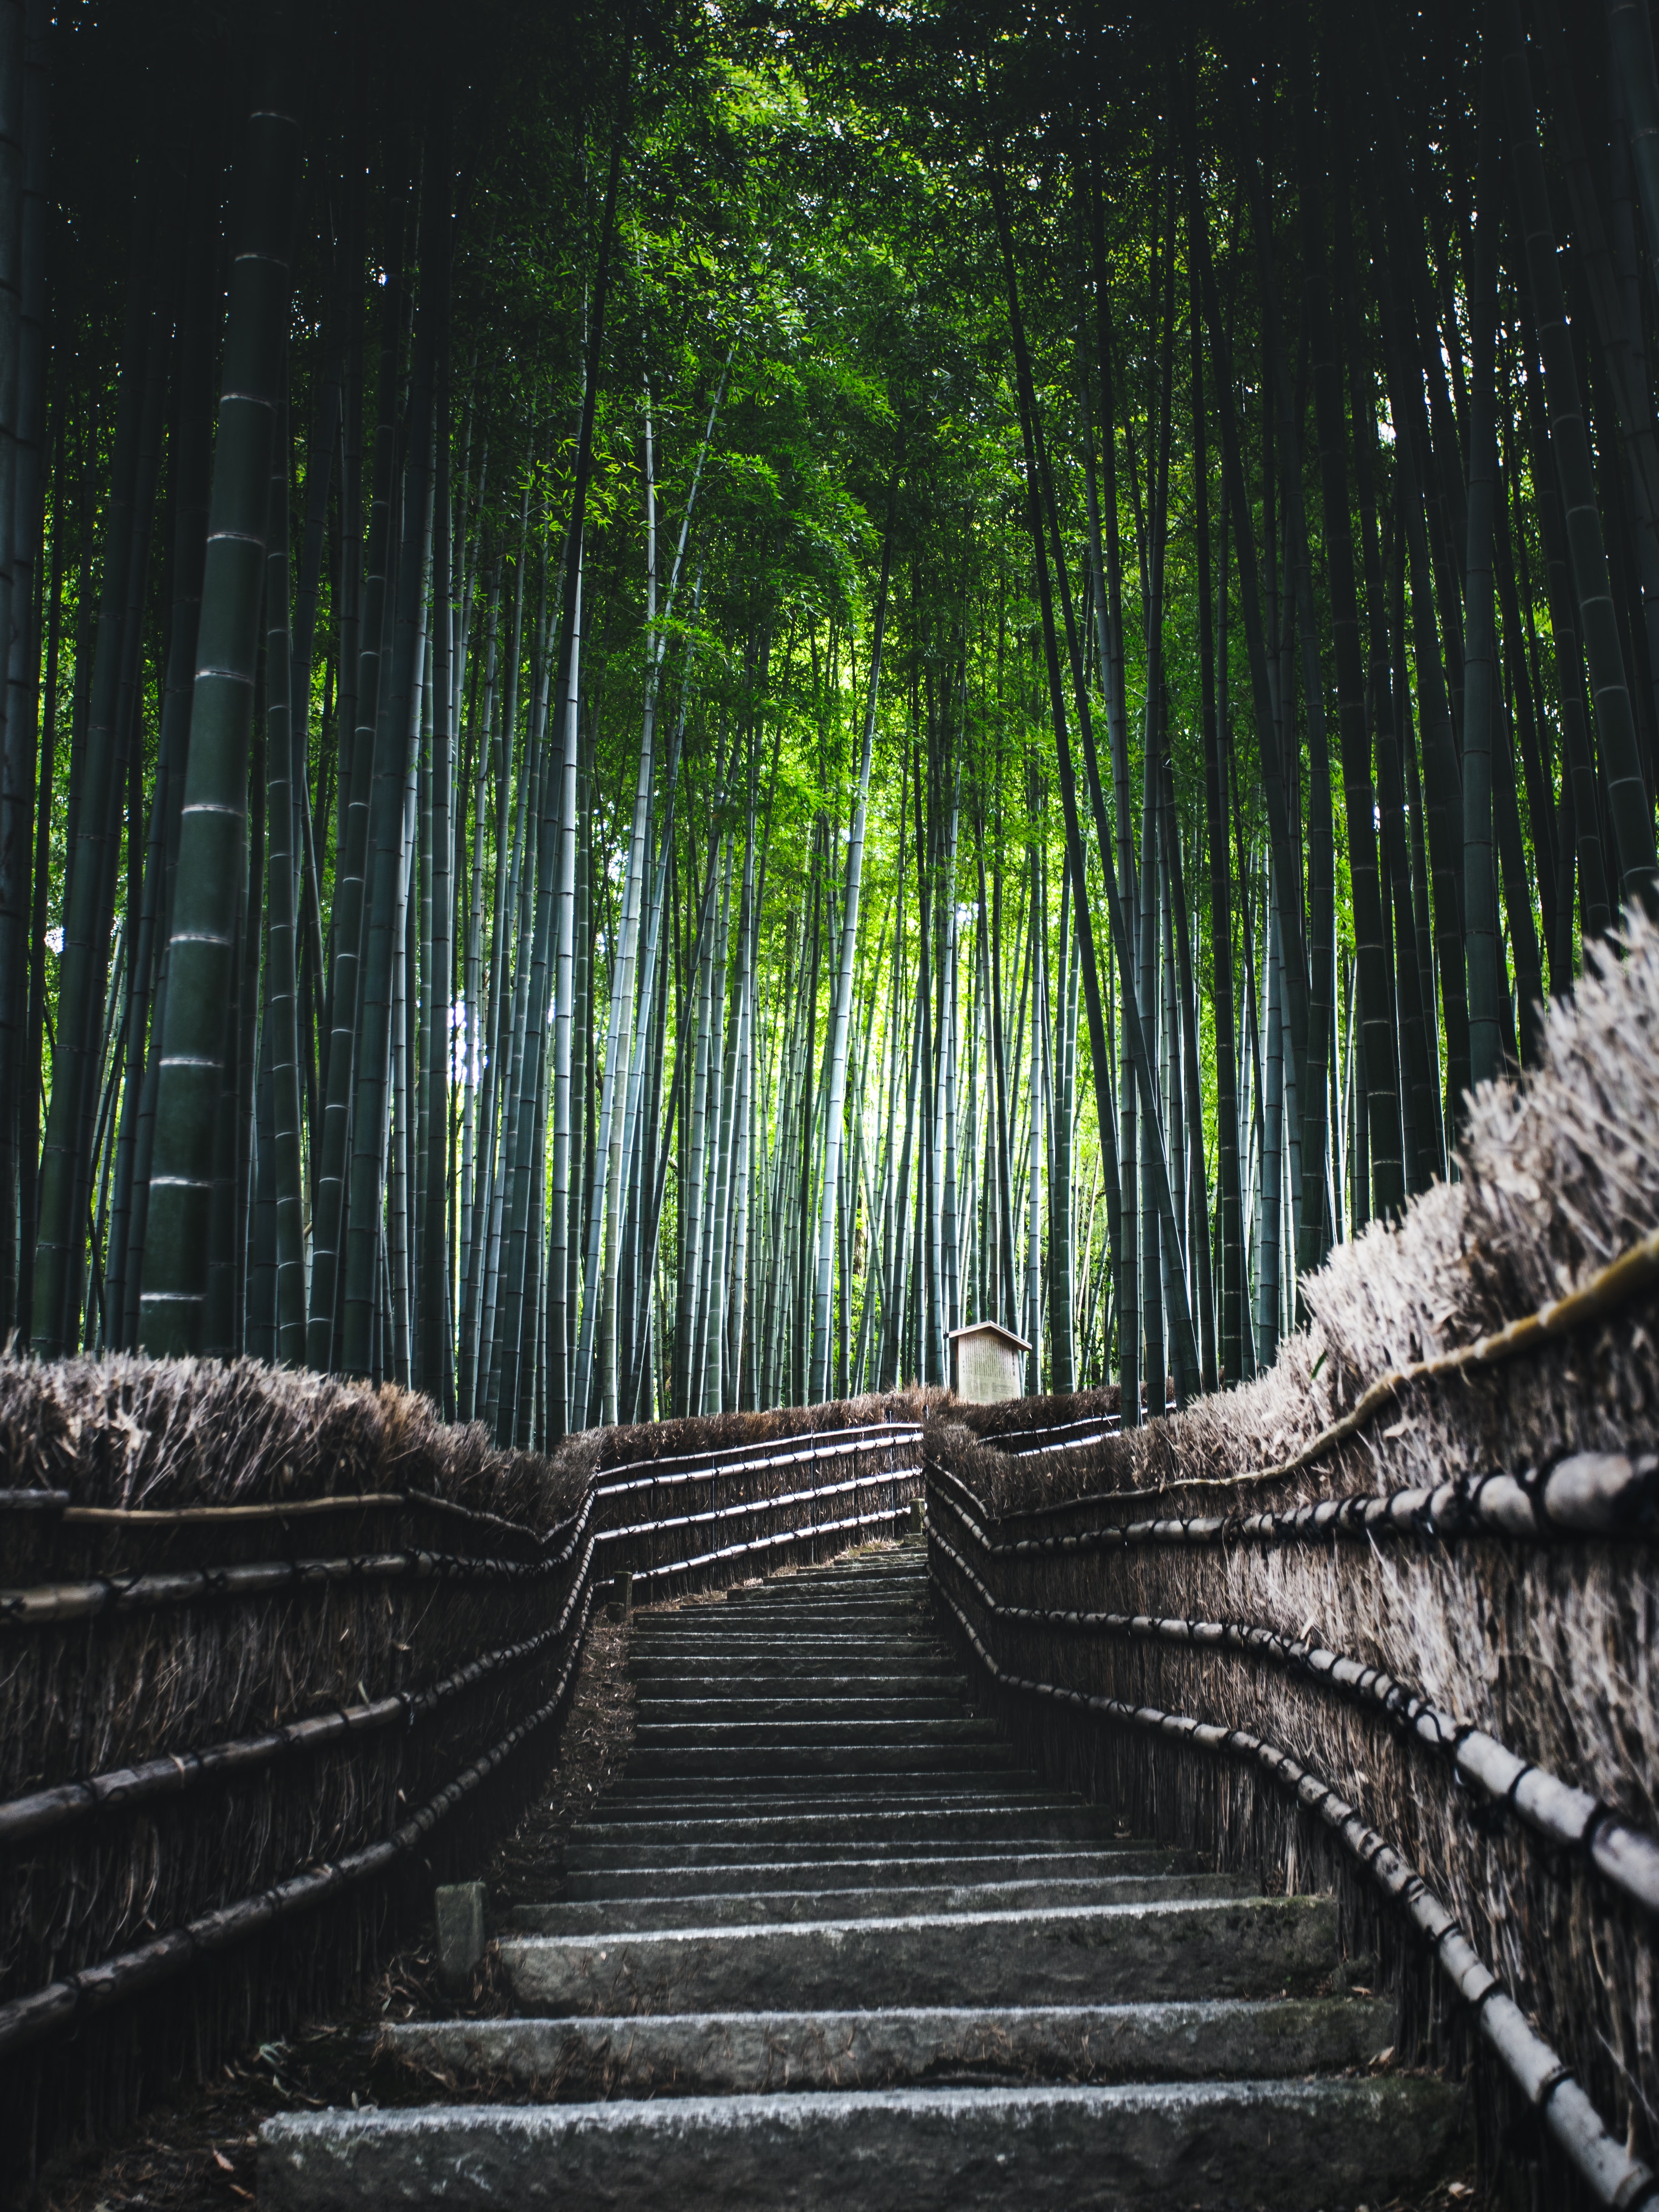 bamboo, nature, forest, trees, stairs, ladder